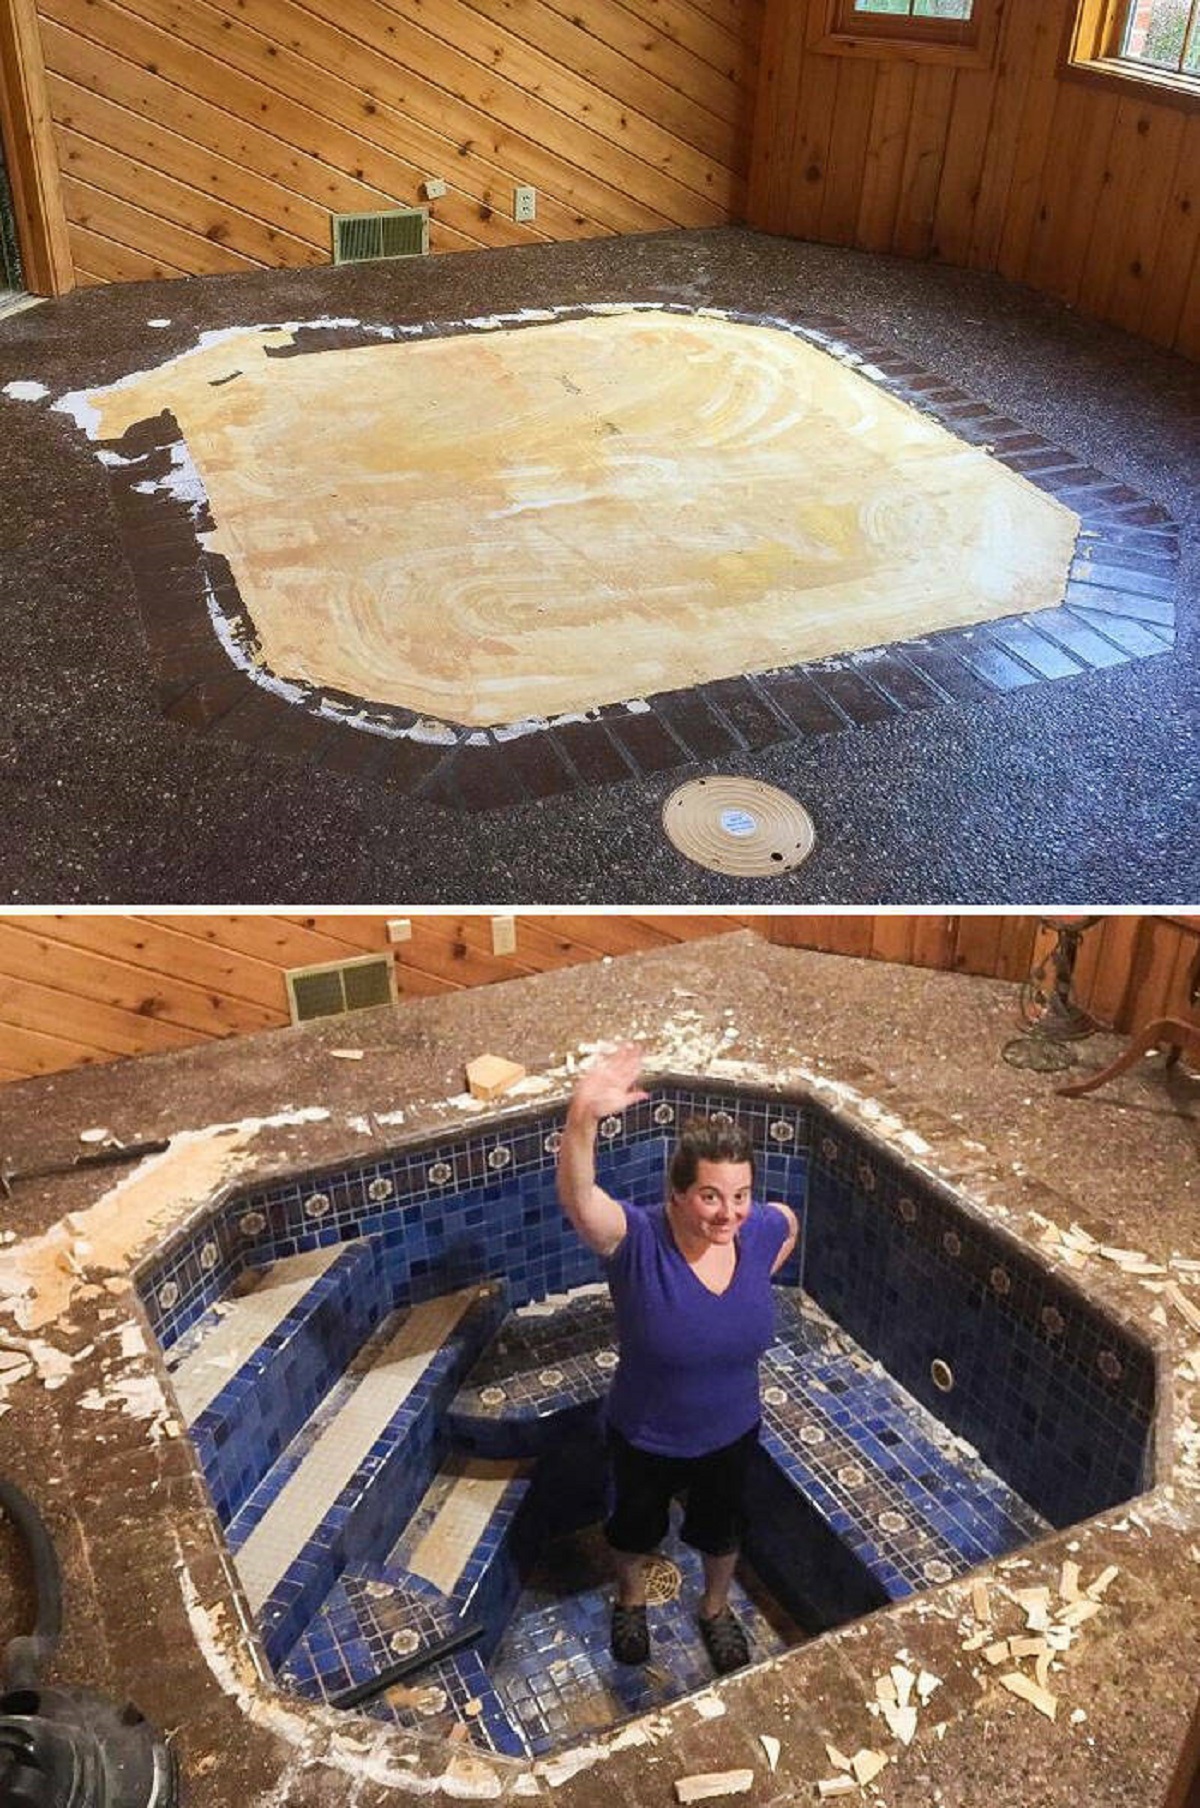 "They Found The Old Bath Under Their Living Room"